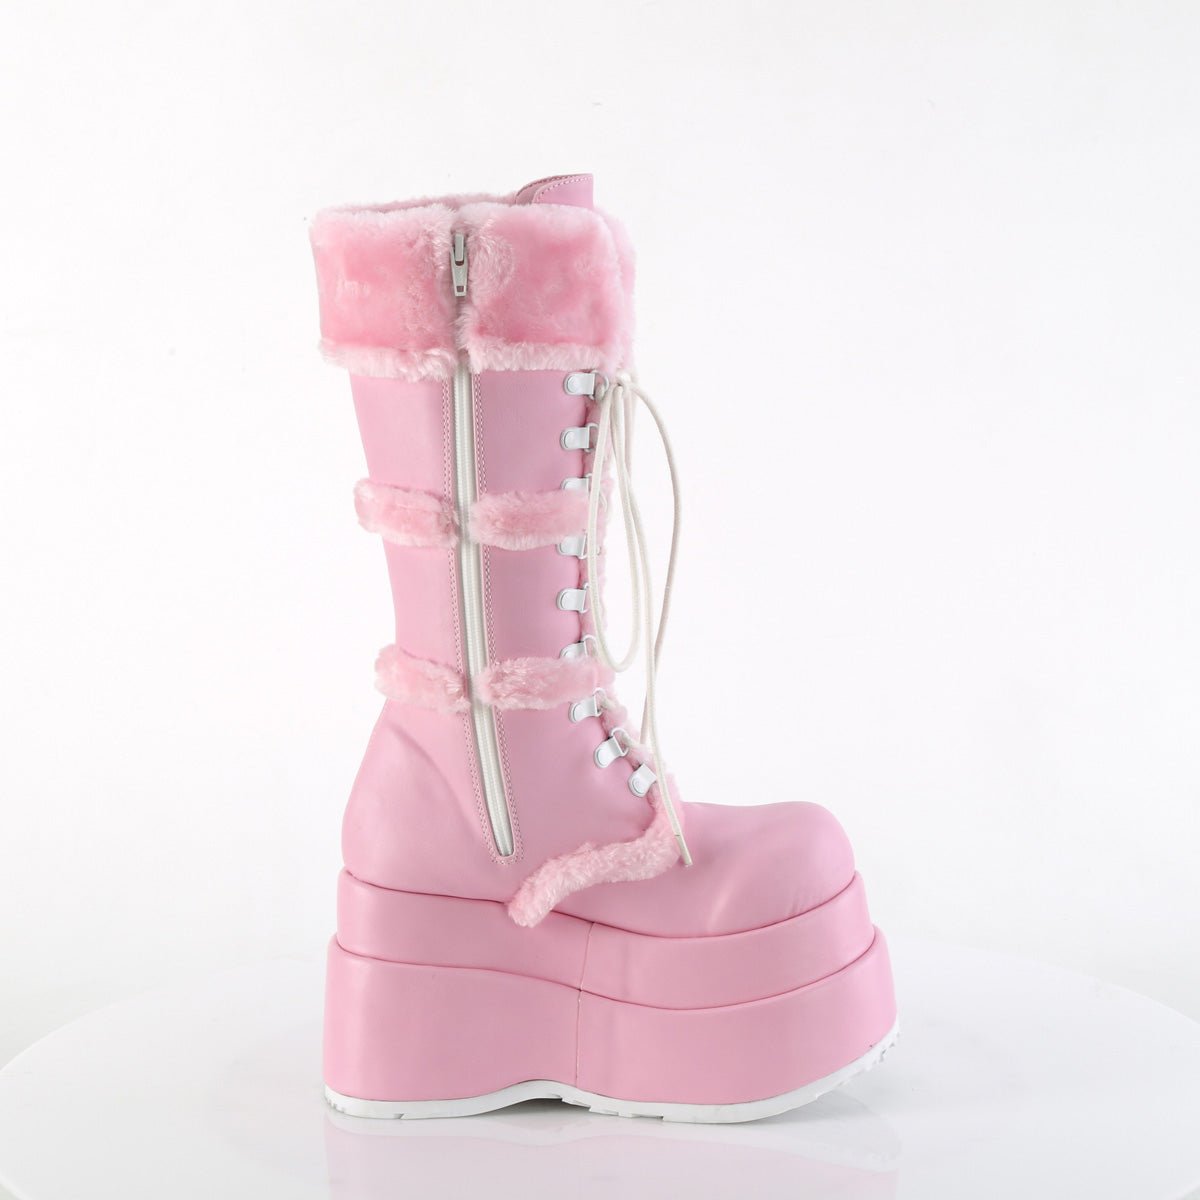 Too Fast | Demonia Bear 202 | Baby Pink Vegan Leather Women's Mid Calf Boots